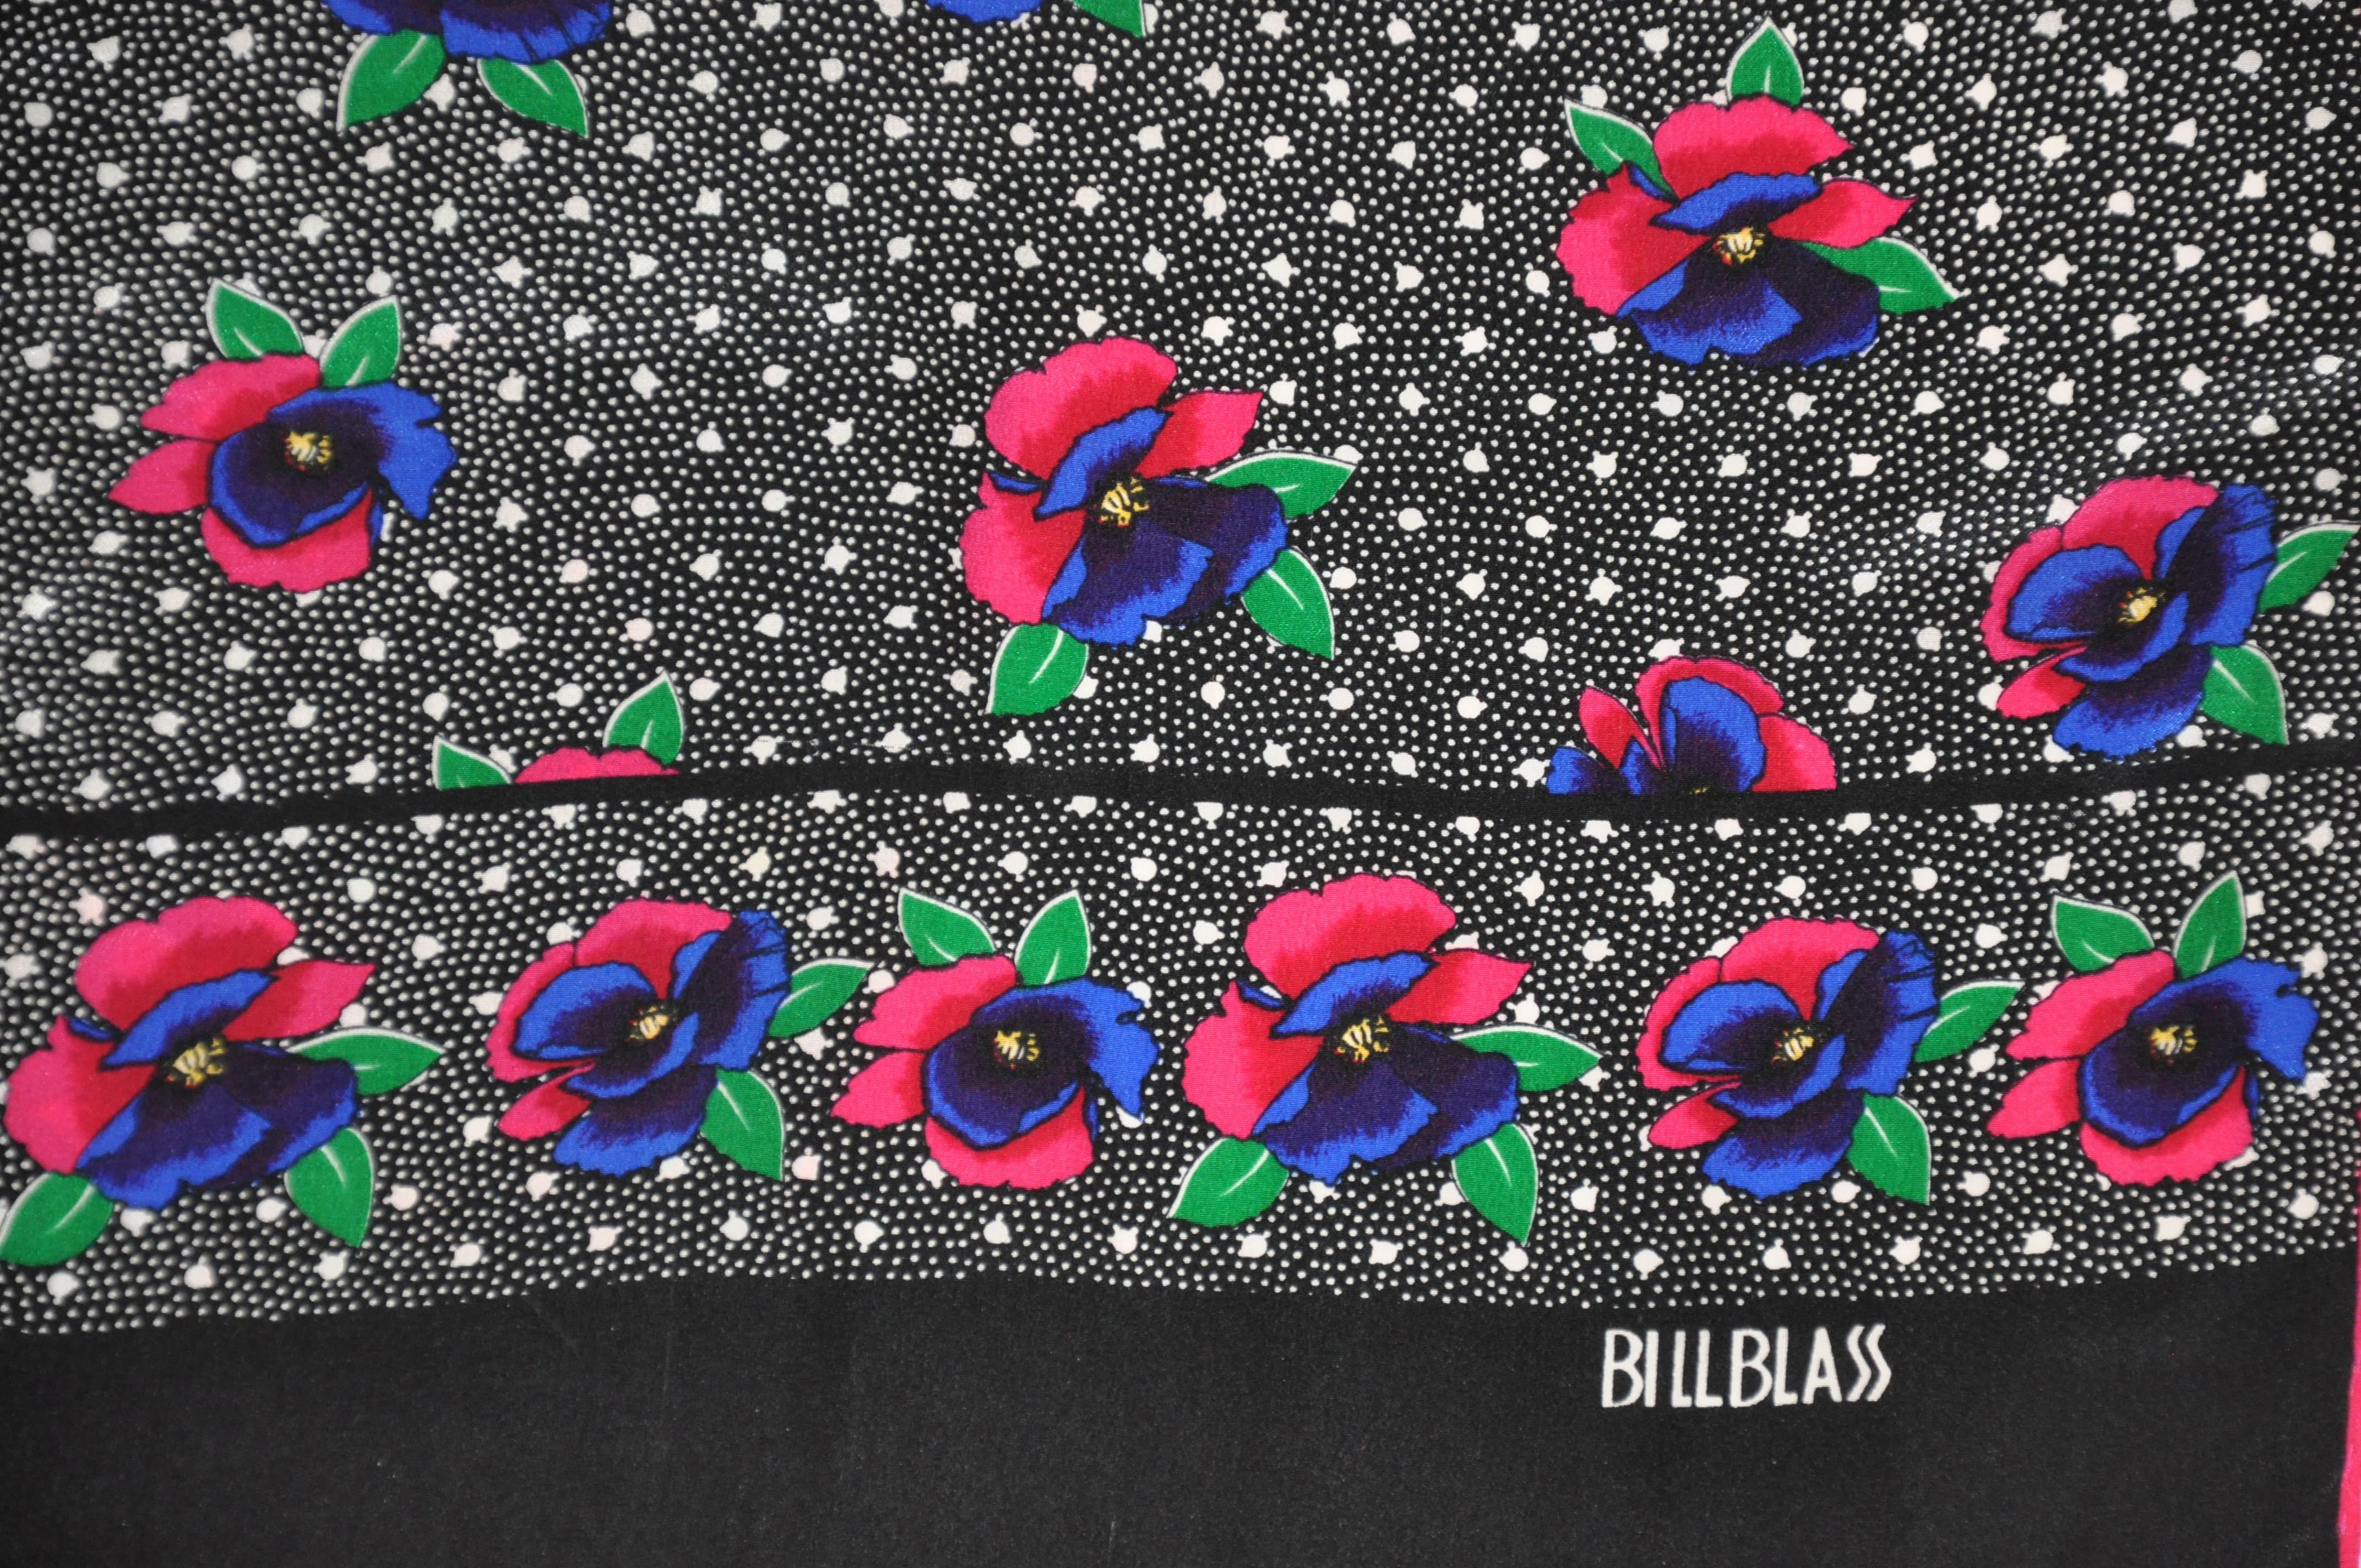 Bill Blass wonderful combination of multi-colors floral rectangle silk scarf measures 11" x 56". Edges are hand-rolled with fringed ends. Made in Japan.